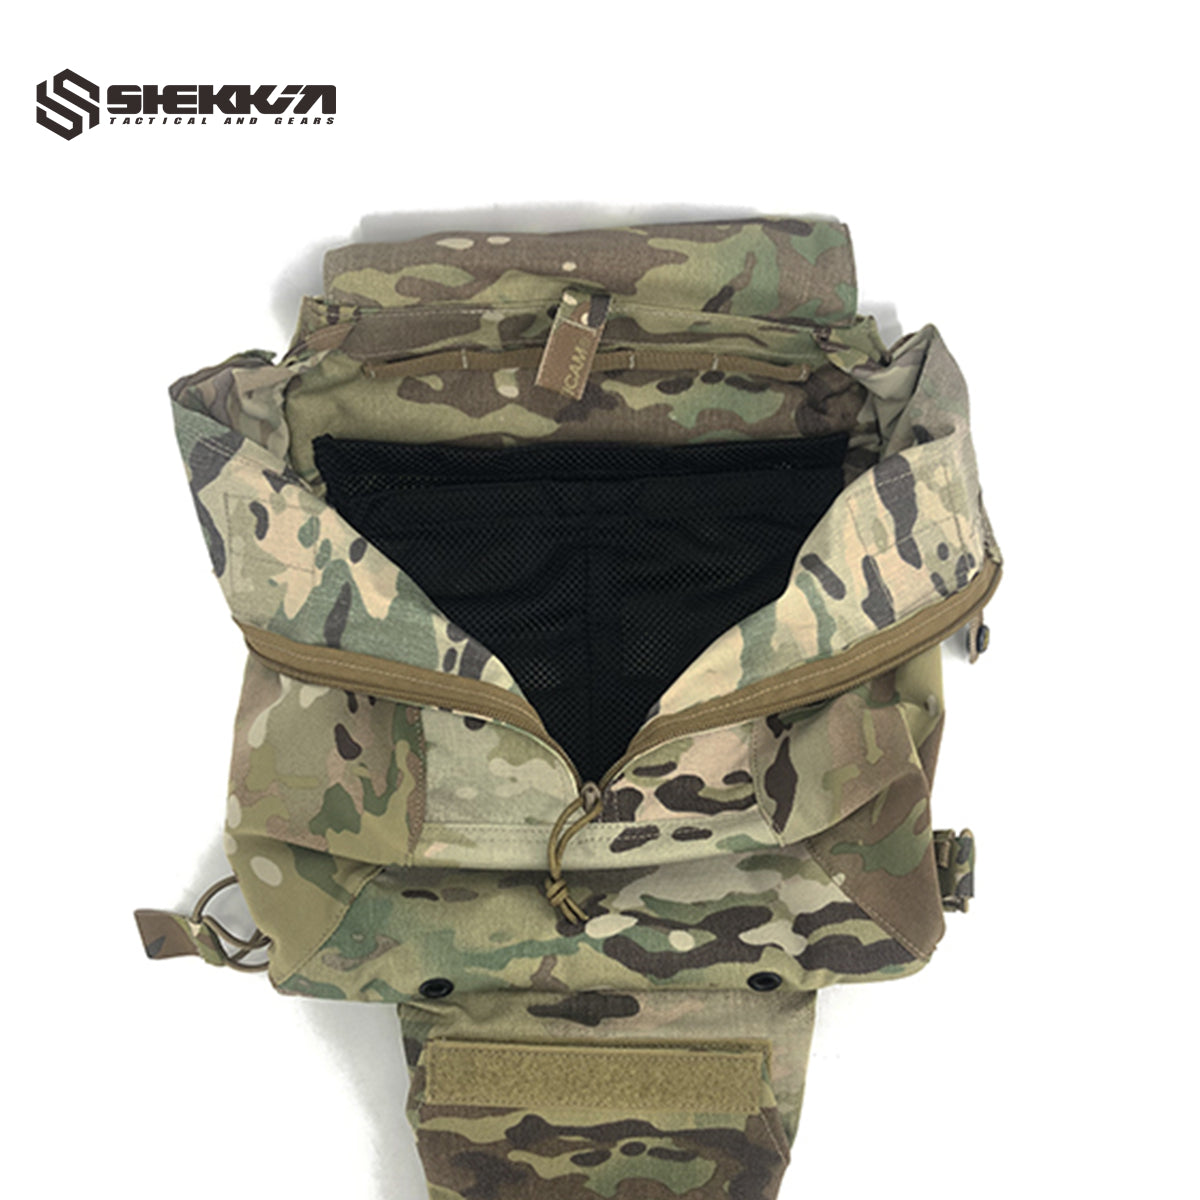 Crye Style Pack zip-on Panel 2.0 - Shekkin Gears